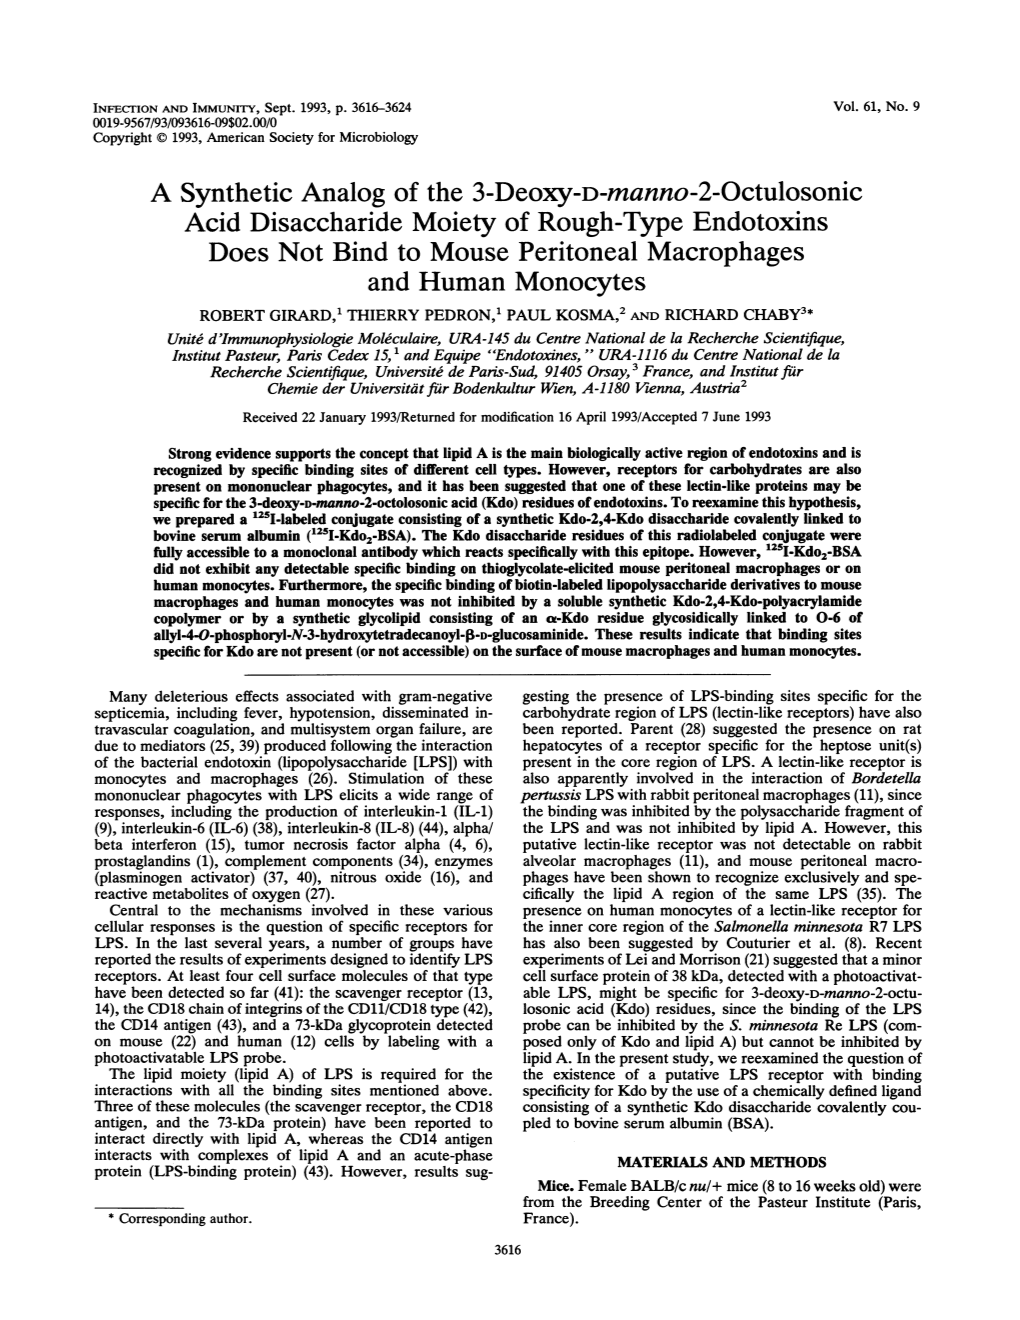 A Synthetic Analog of the 3-Deoxy-D-Manno-2-Octulosonic